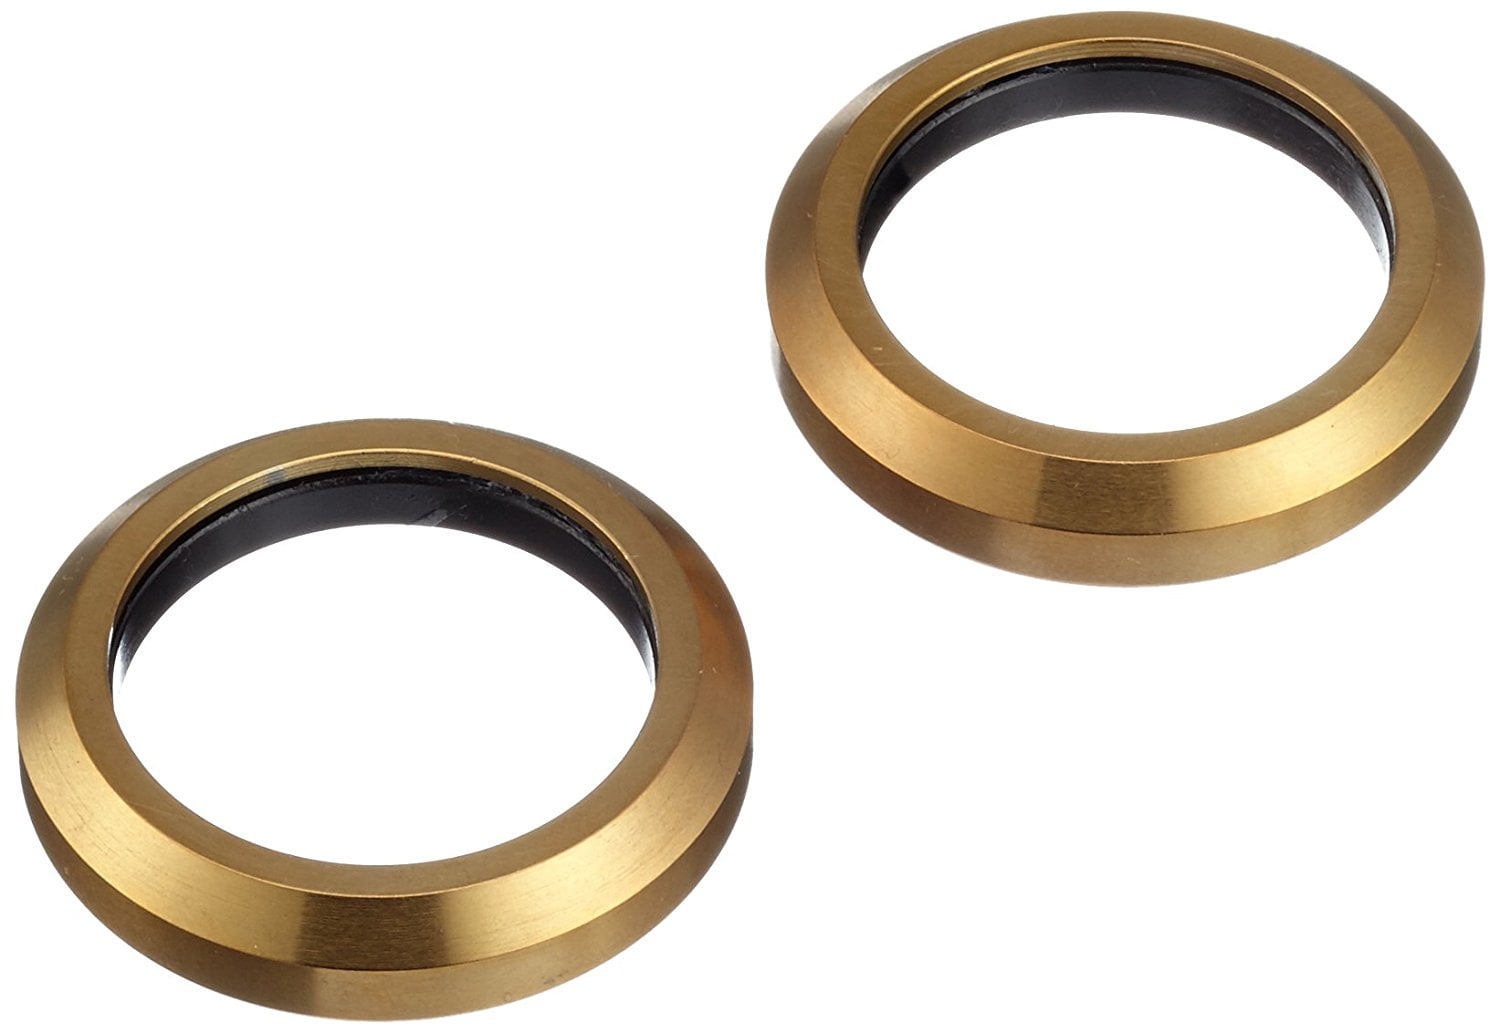 Gold - Press Fit 1 1/8 and Drop In HS/Cane Creek 41.0 mm Ritchey Headset Replacement Bearing